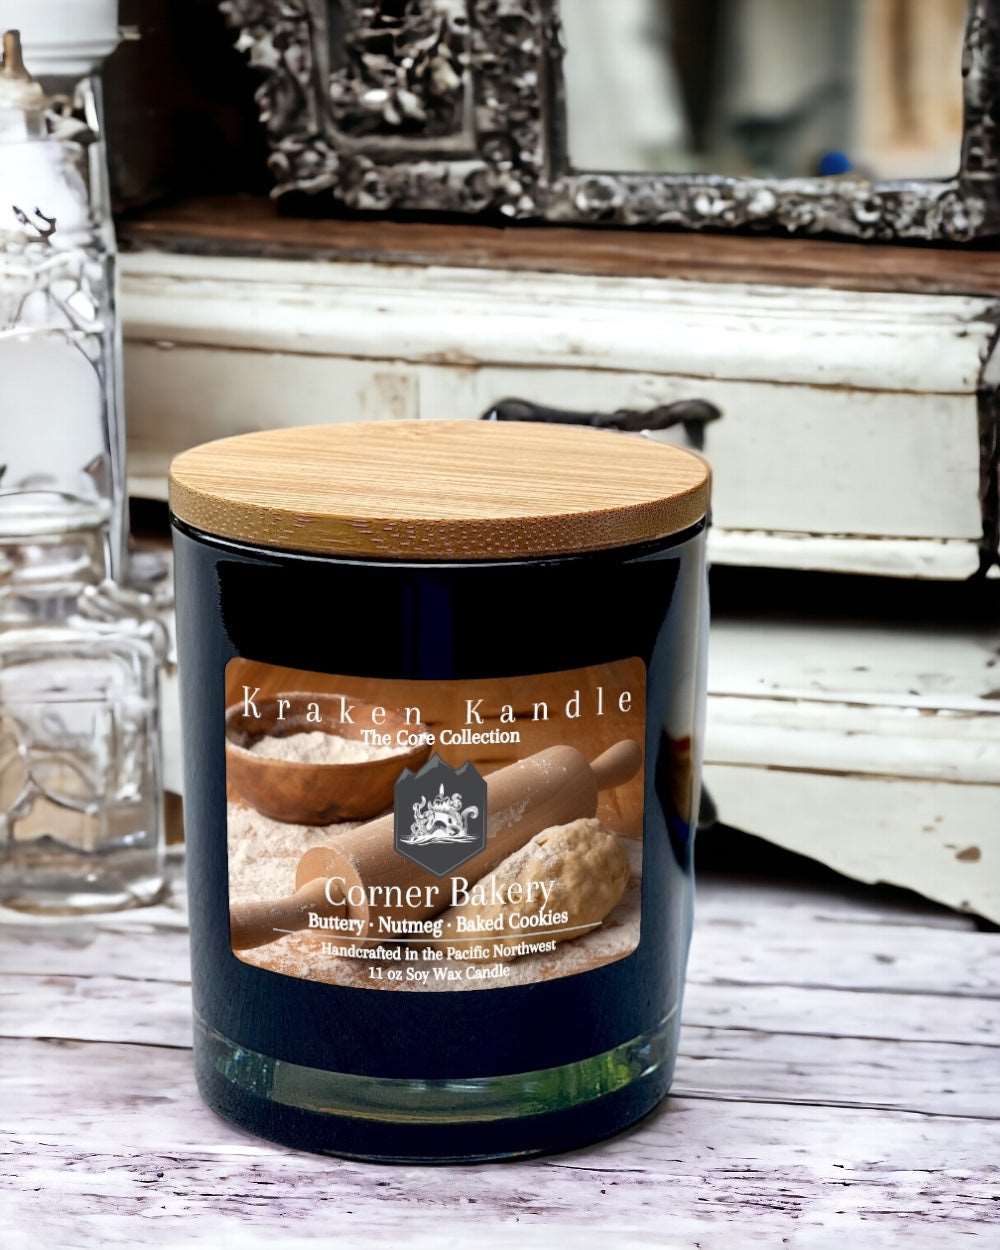 Corner Bakery candle with scented of fresh baked cookies Nutmeg and butter